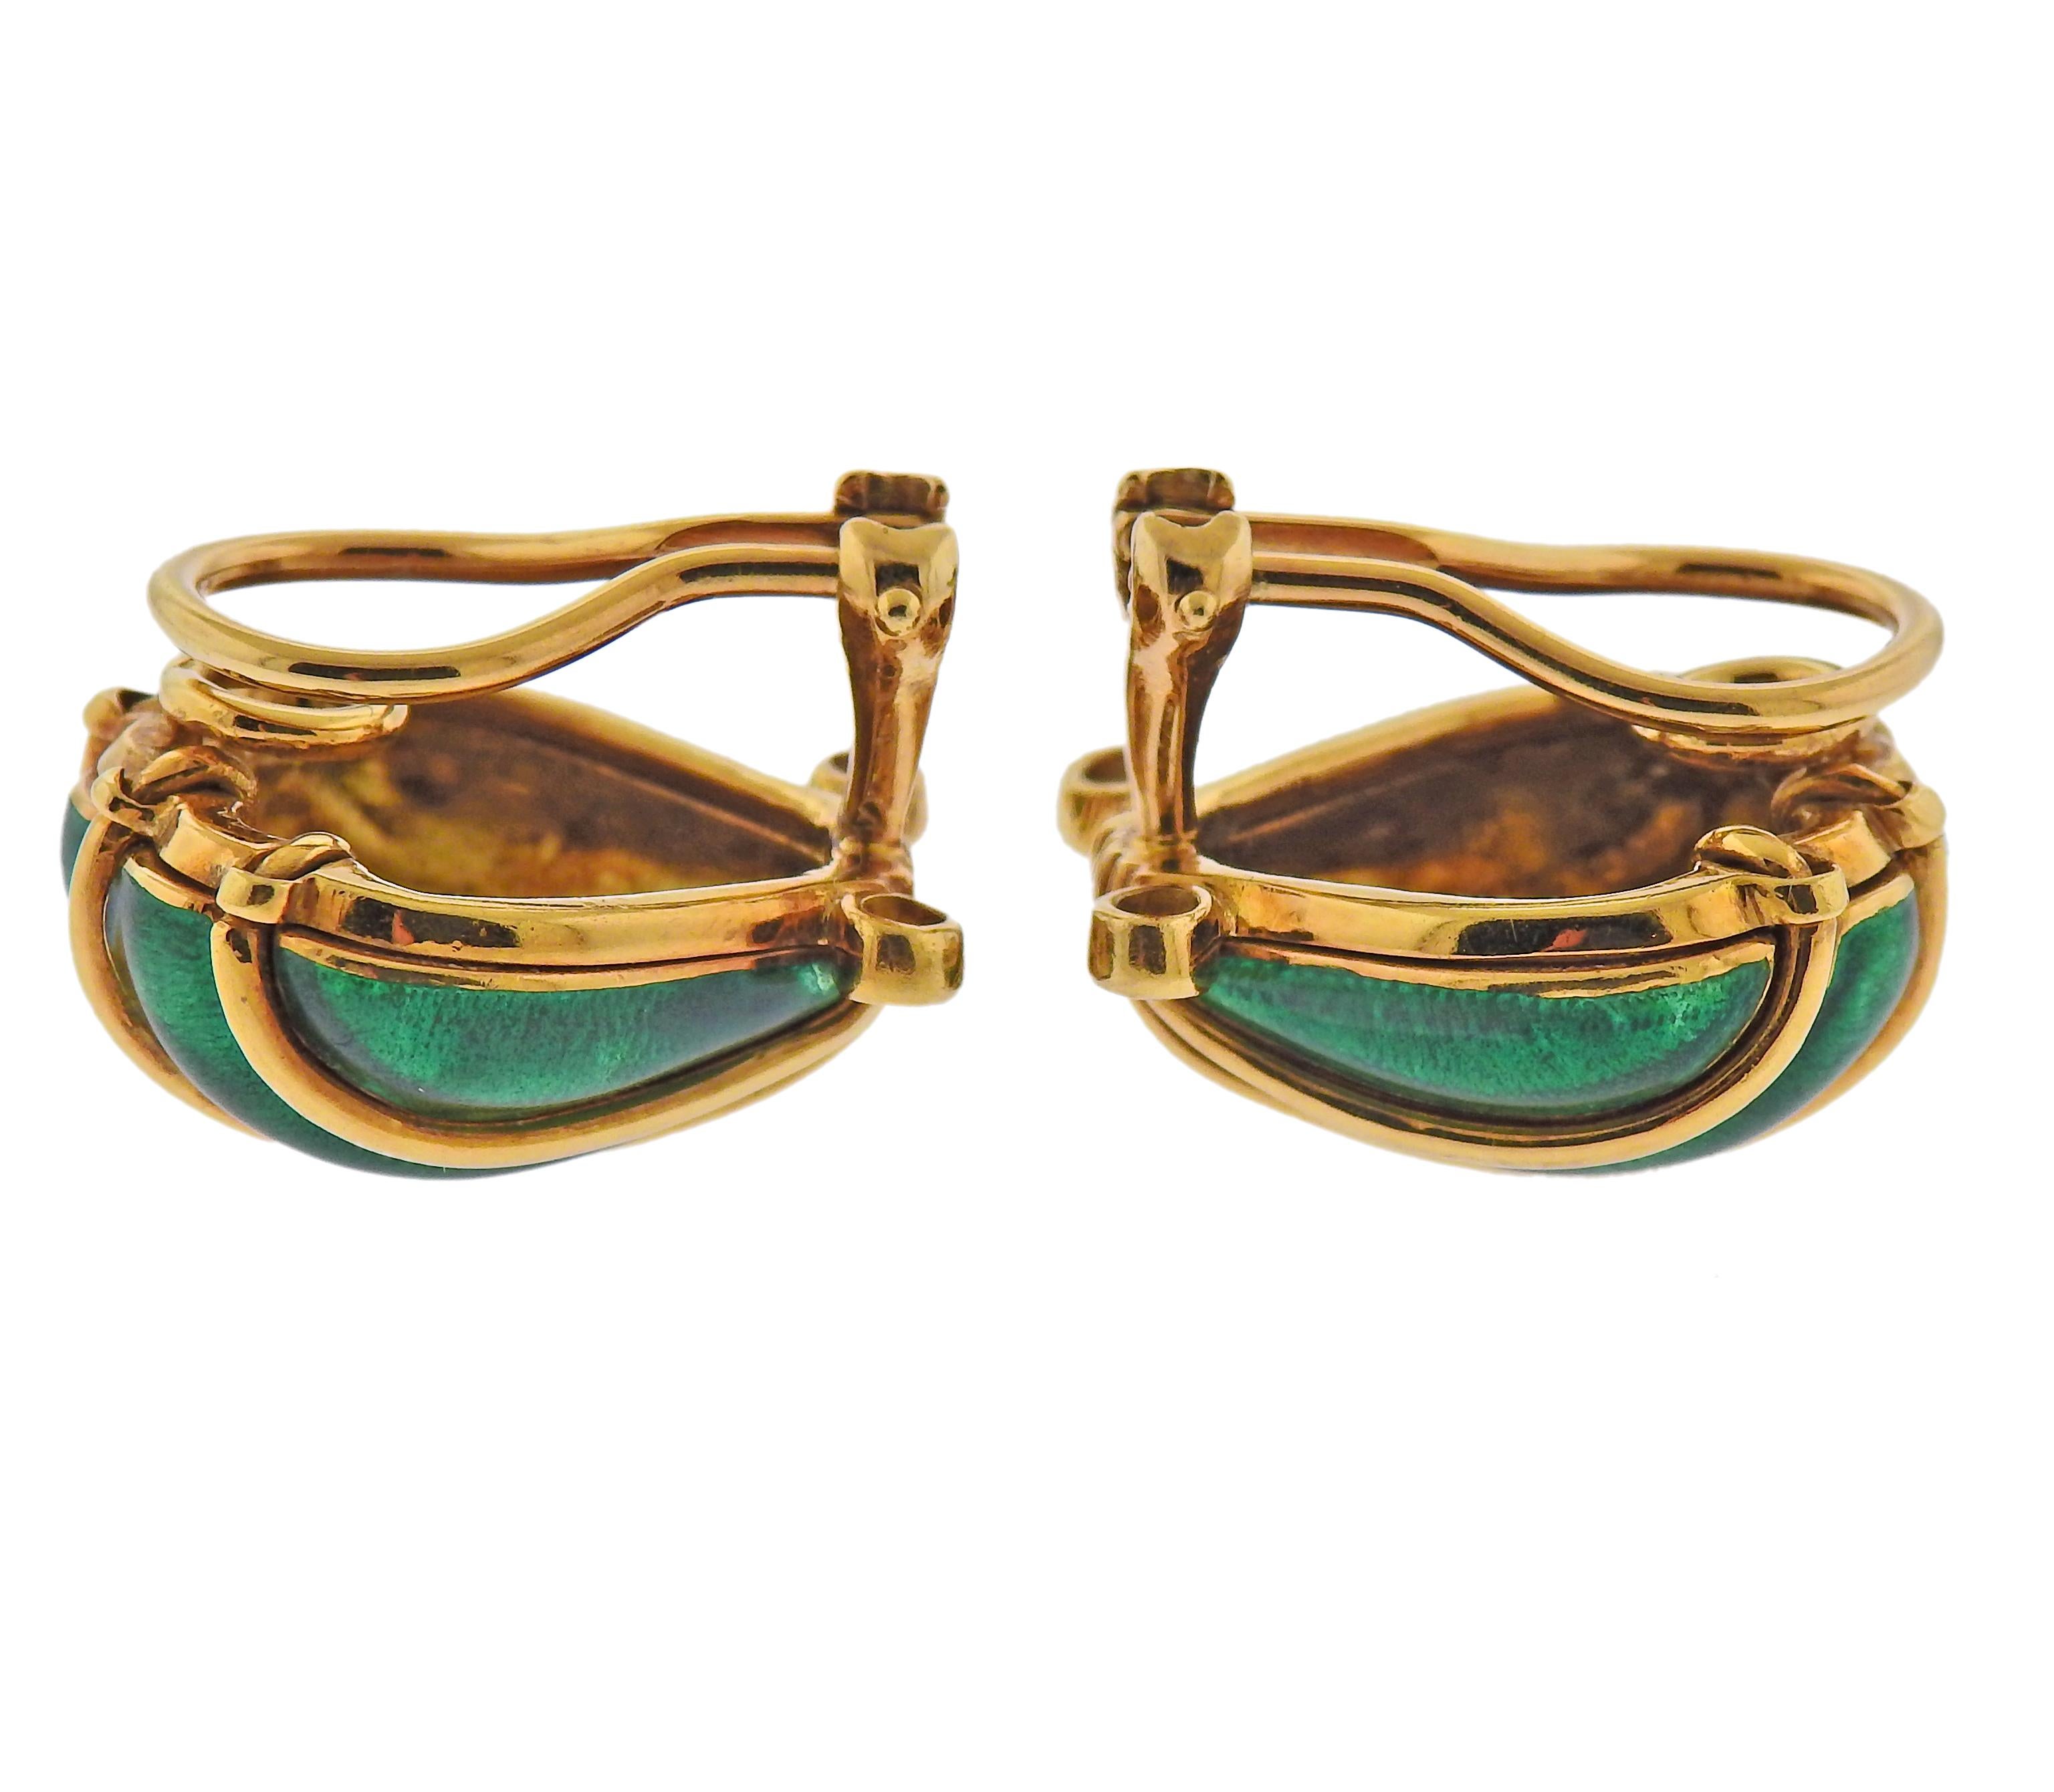 Pair of 18k gold shell motif earrings by Jean Schlumberger for Tiffany & Co, with bright green enamel and approx. 0.24ctw in G/VS diamonds.  Earrings are 20mm x 18mm. Weight - 20.9 grams. Marked: Tiffany & Co, Schlumberger, 750.